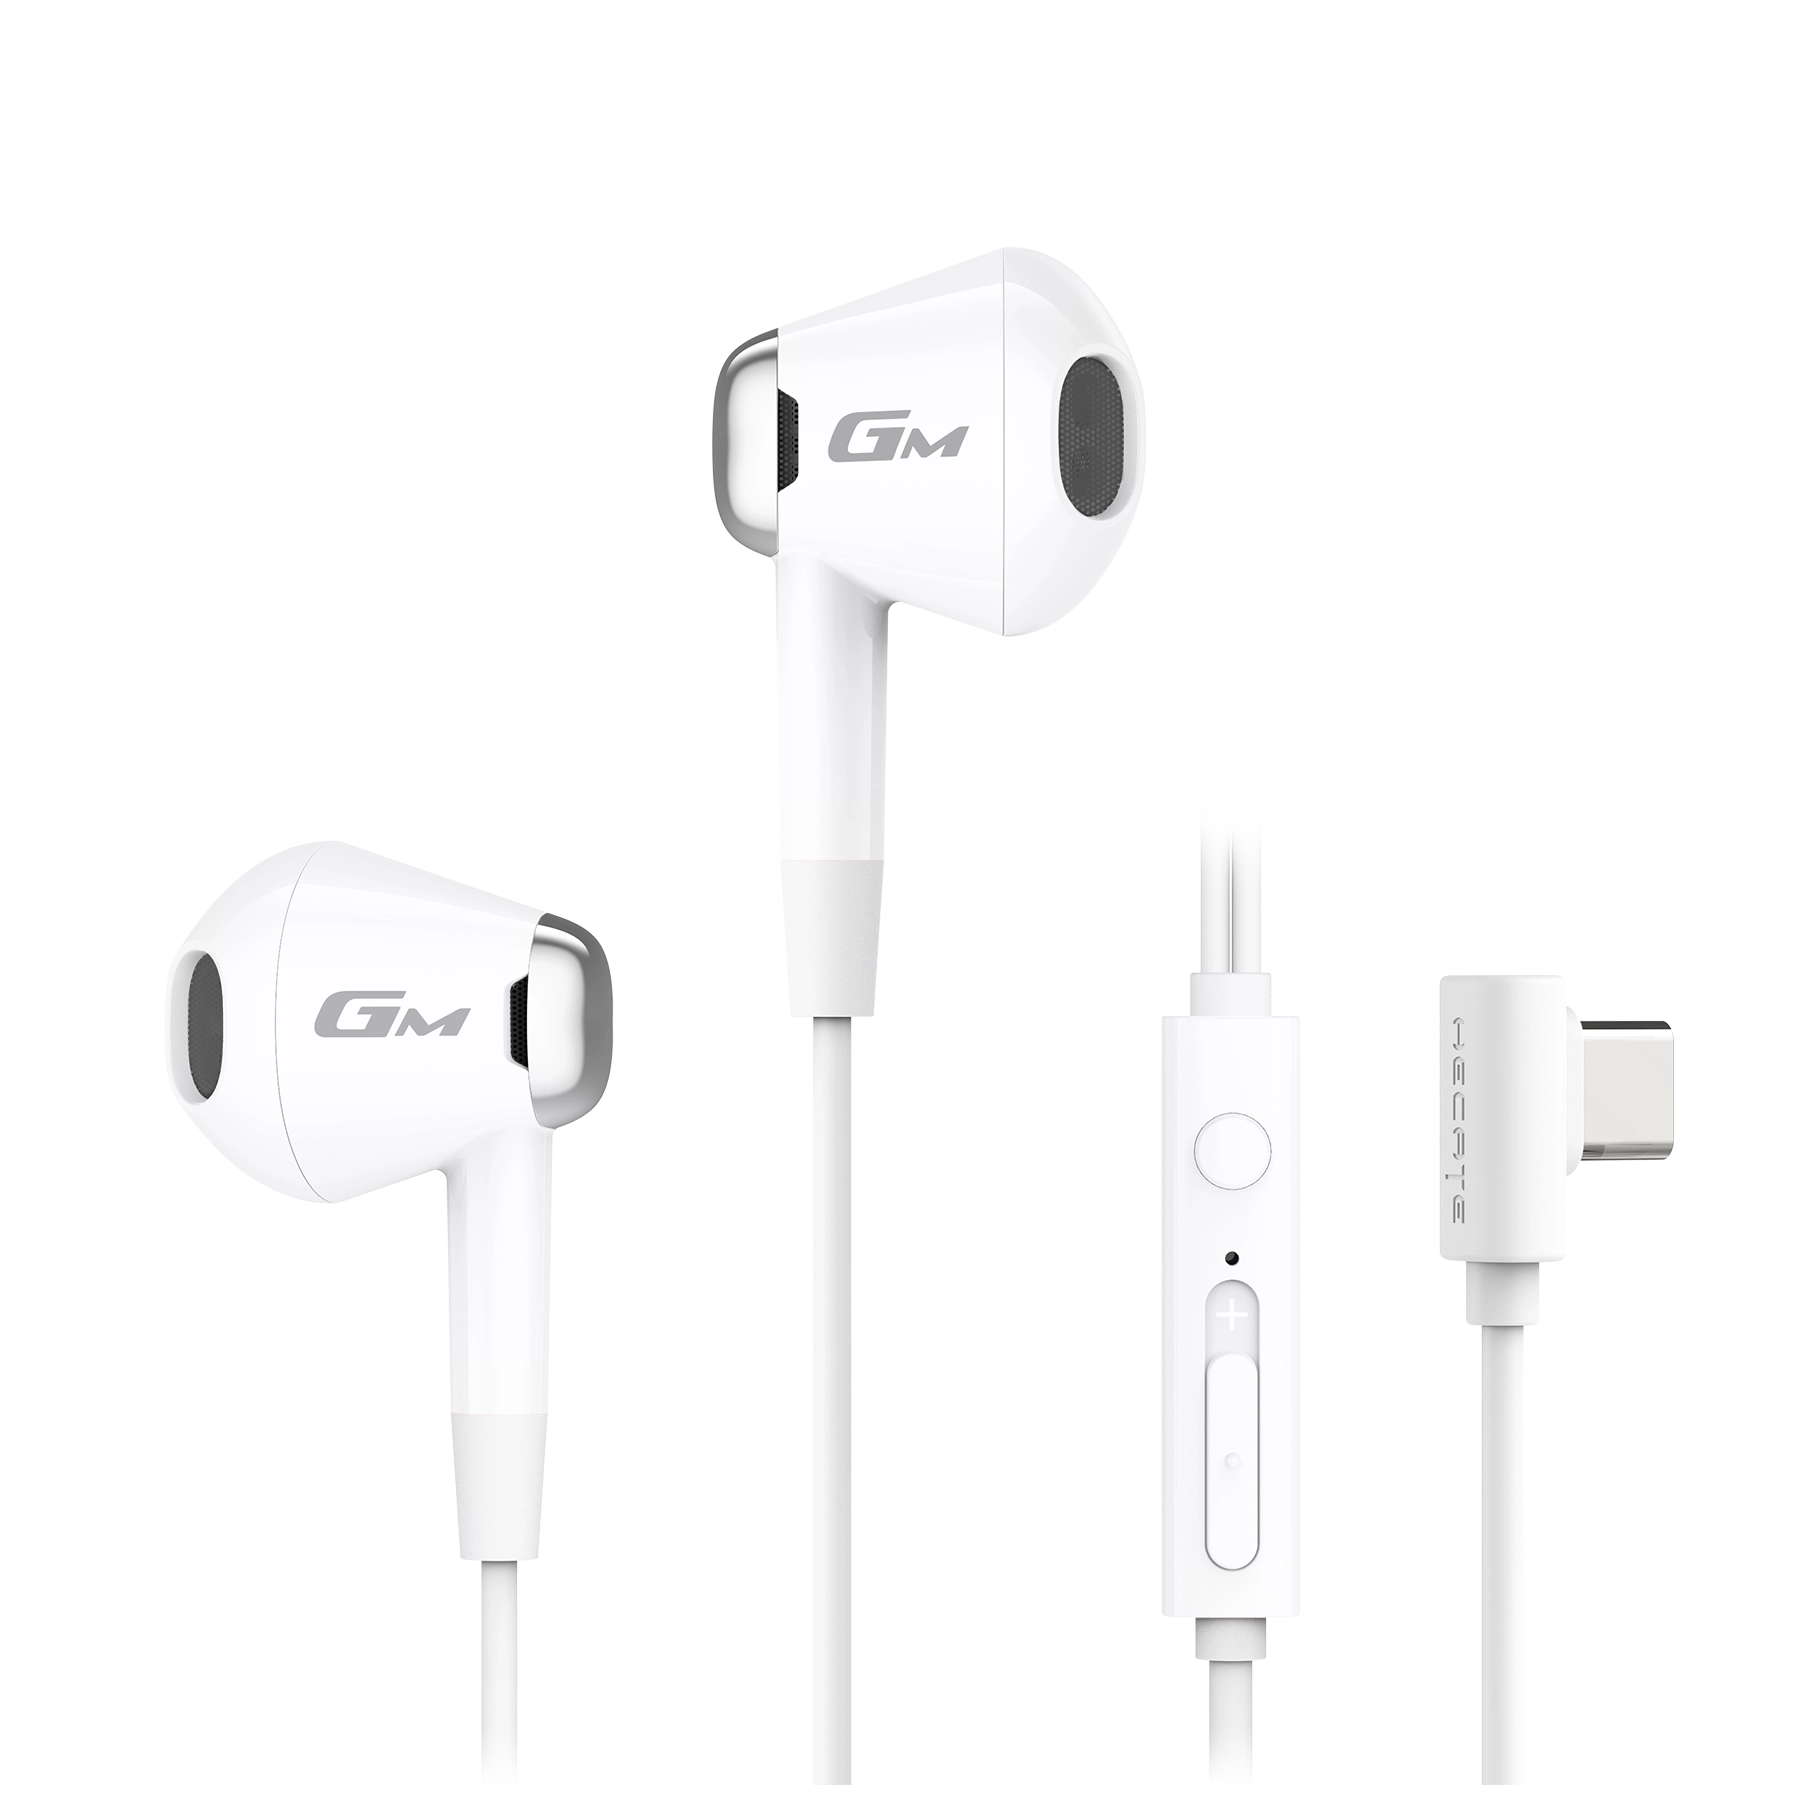 GM180 PLUS Earbuds Product Pictures white_1